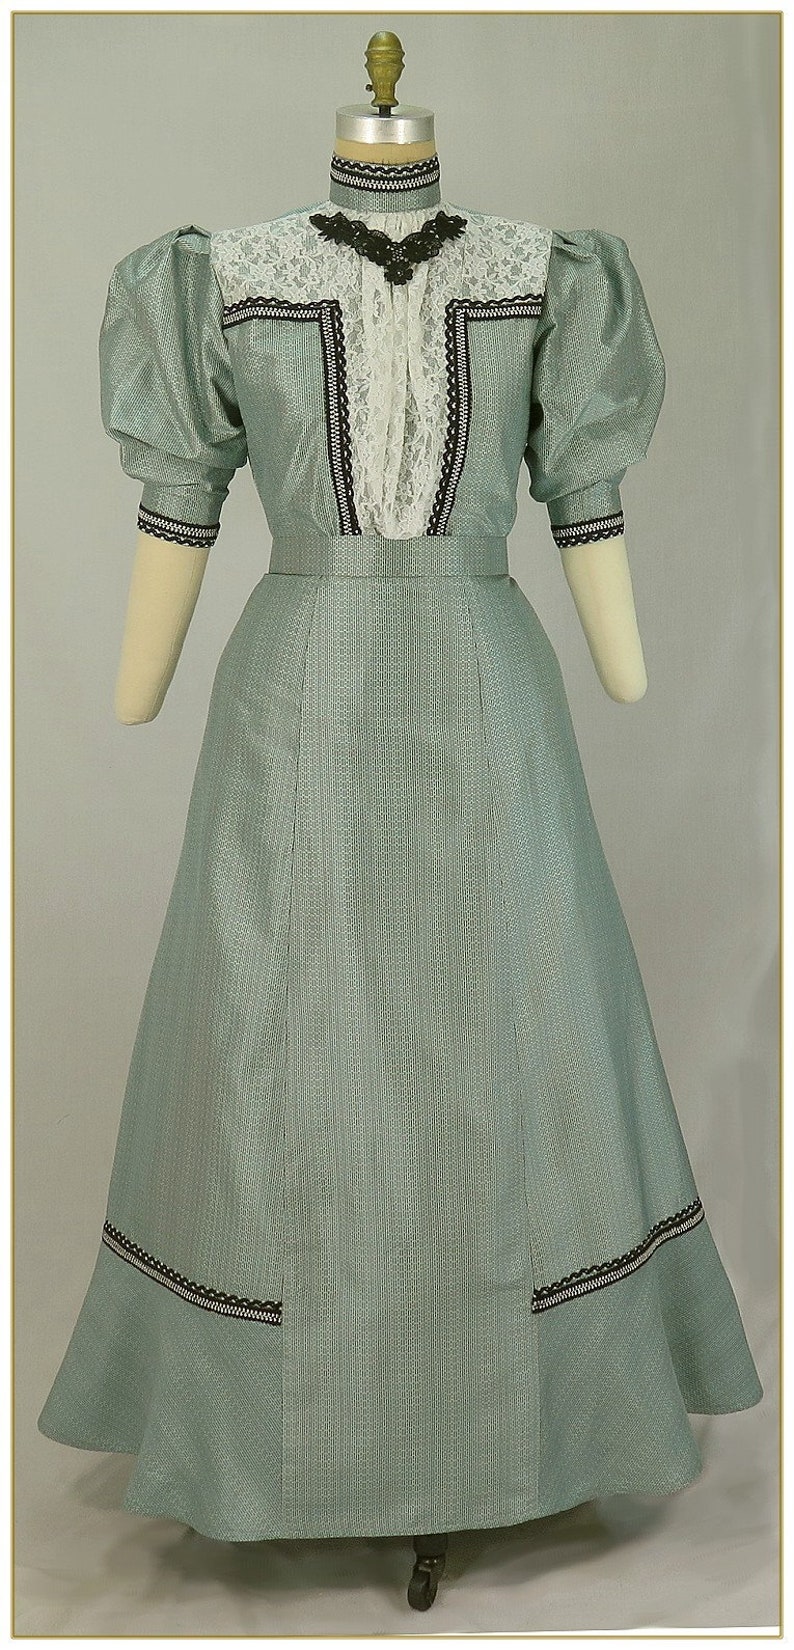 old fashioned women's clothing